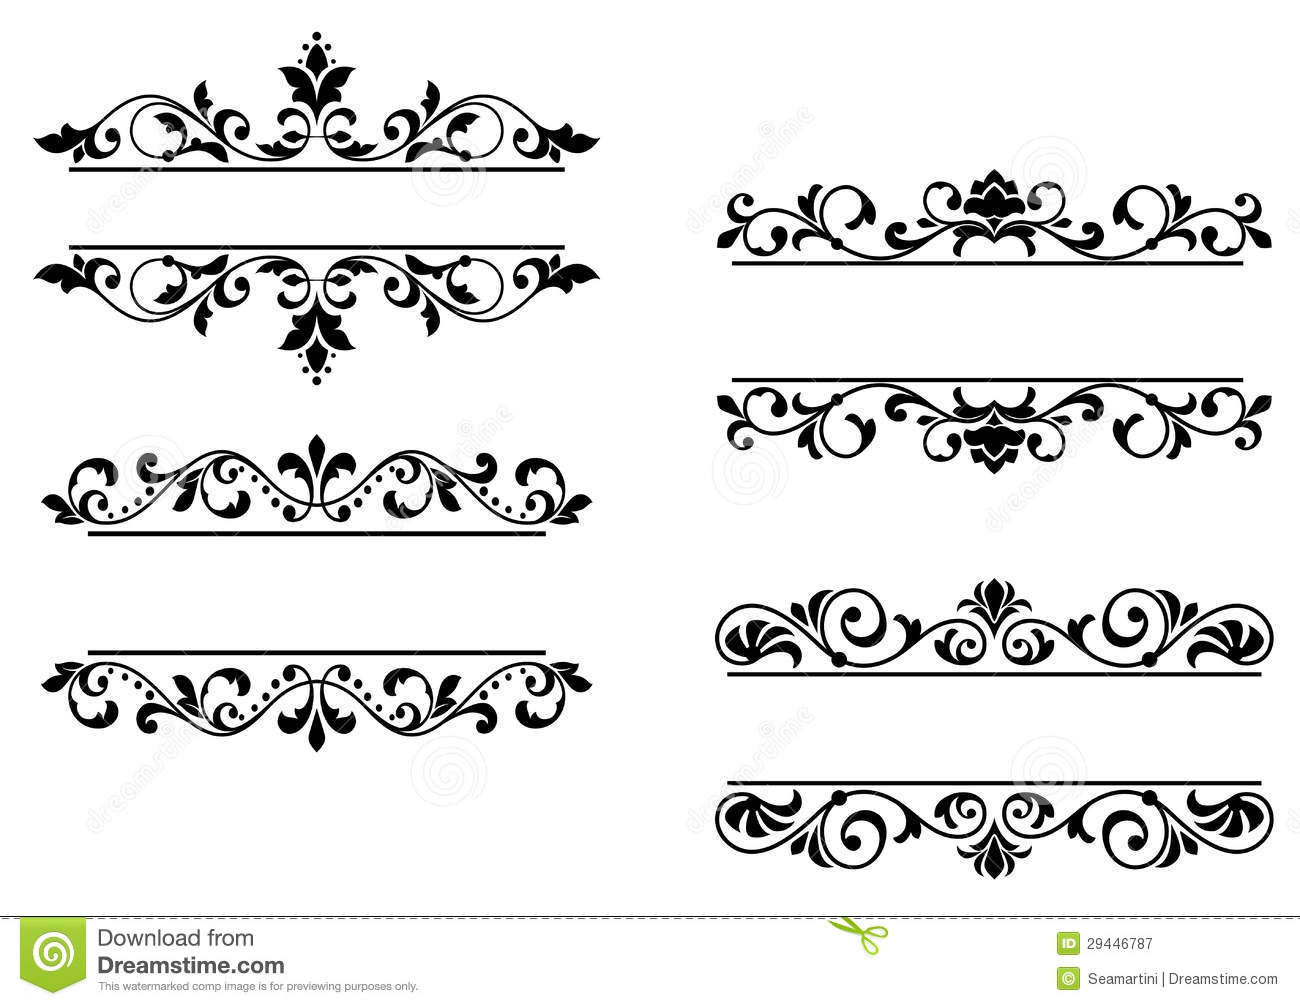 Floral Headers And Borders Royalty Free Stock Photography   Image